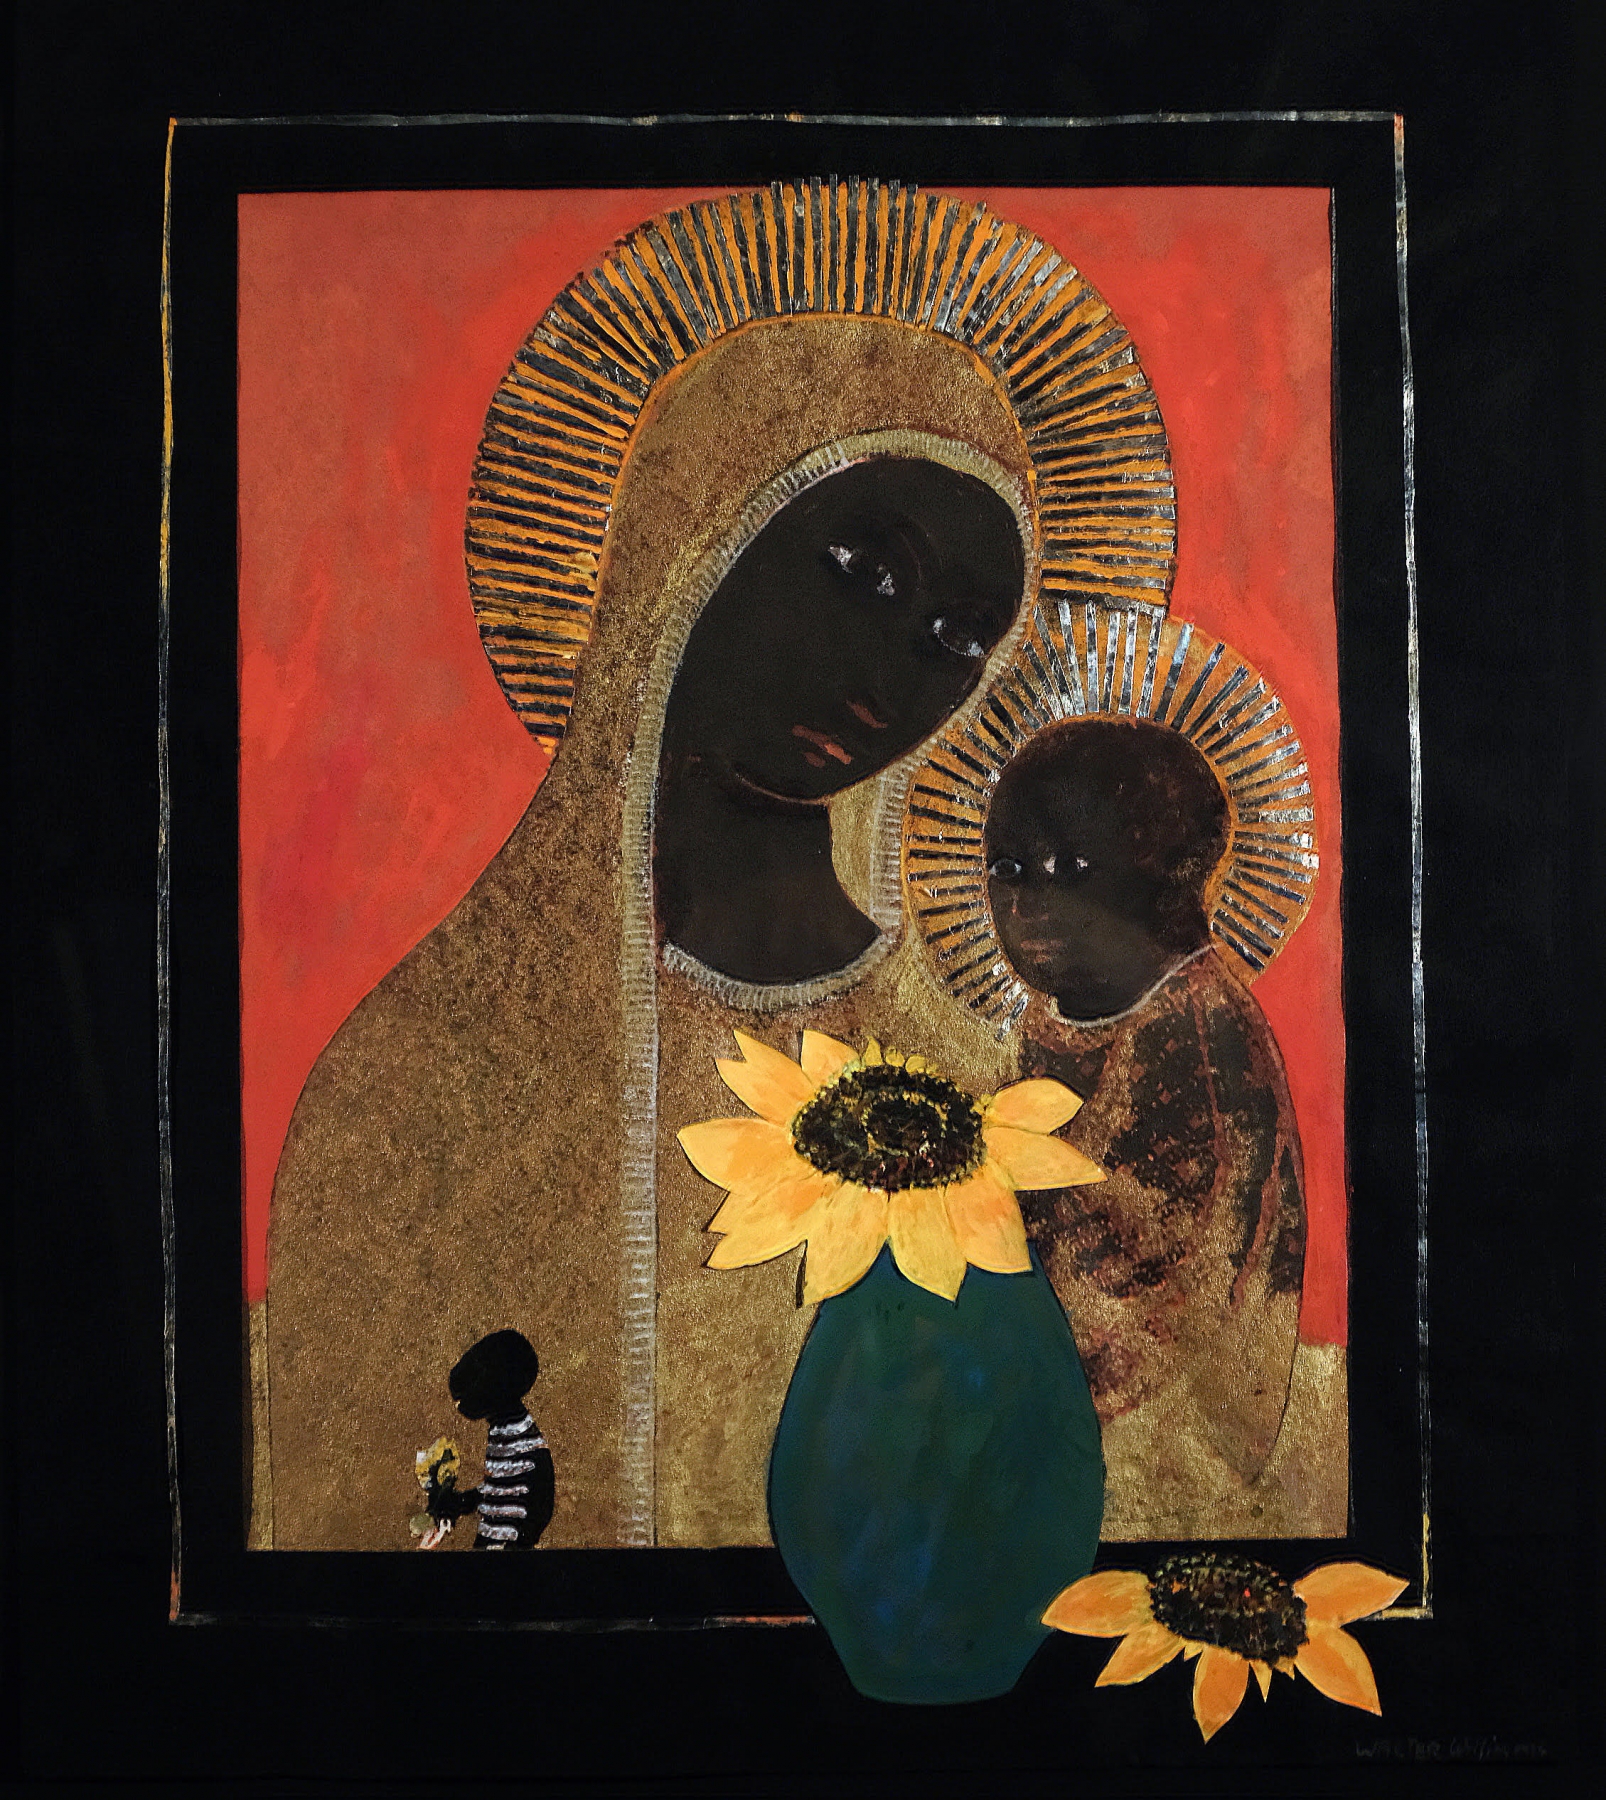 Madonna Ikon #2, 1982, mixed media collage on cotton fabric, 22 &frac12; x 17 &frac12; inches